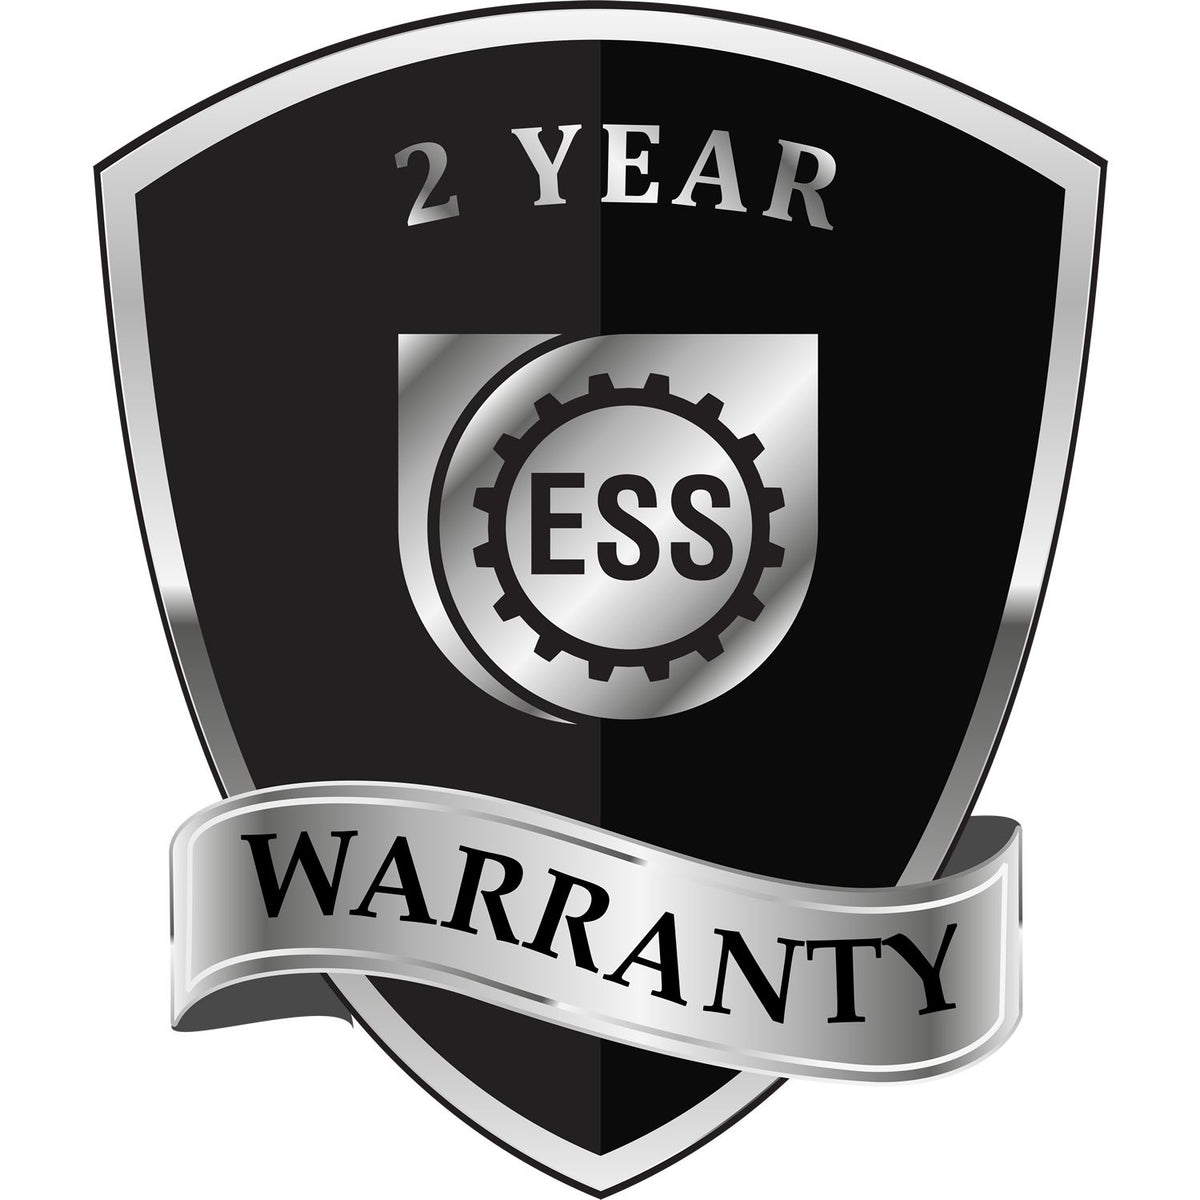 A badge or emblem showing a warranty icon for the State of Minnesota Extended Long Reach Engineer Seal